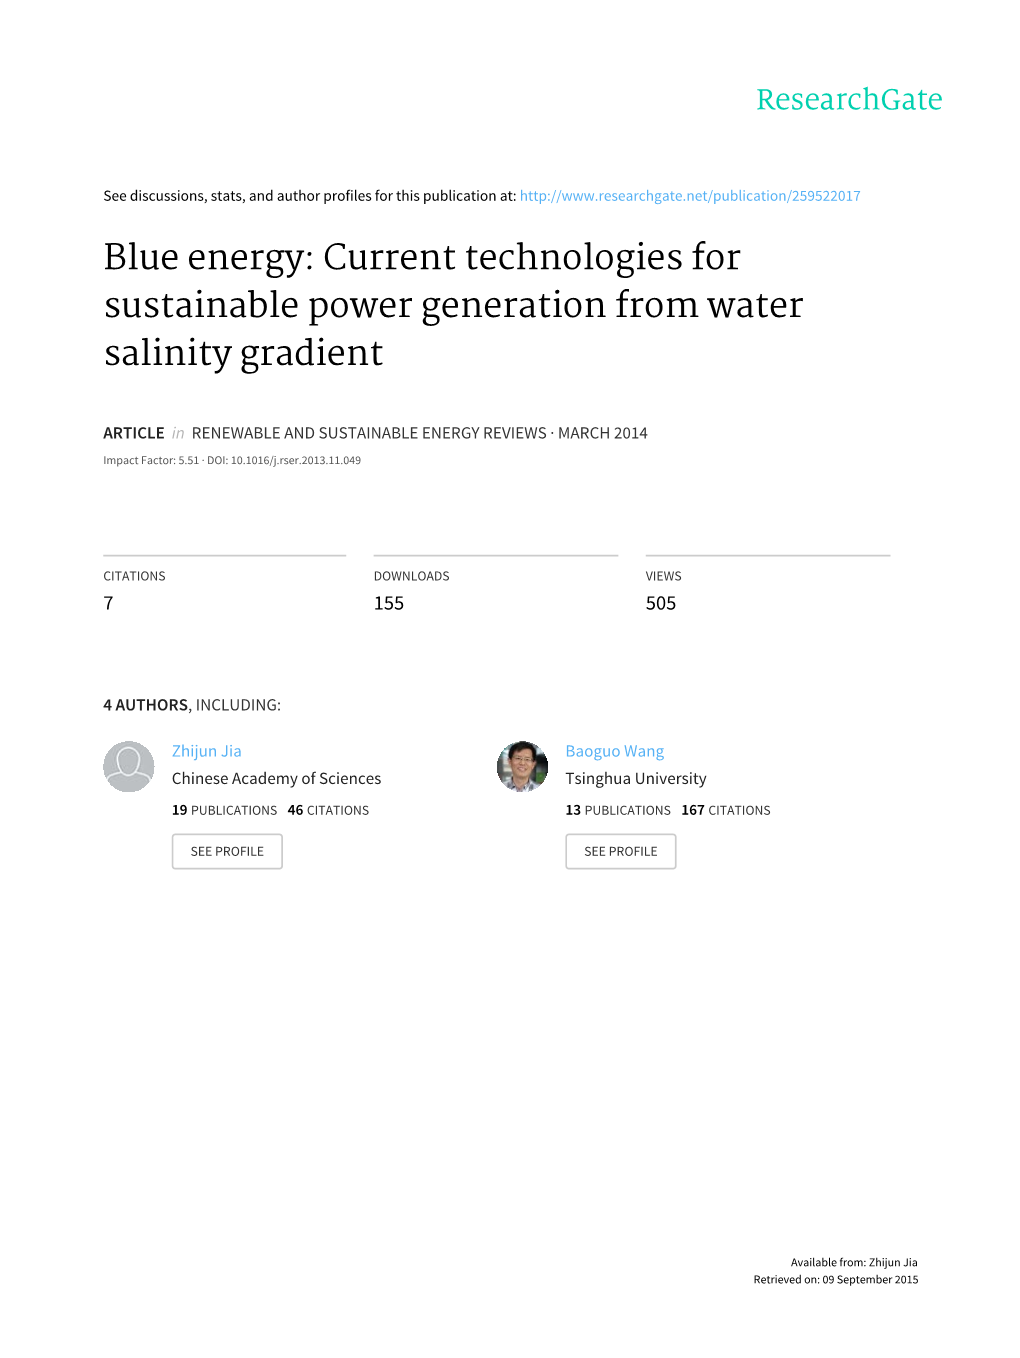 Blue Energy: Current Technologies for Sustainable Power Generation from Water Salinity Gradient